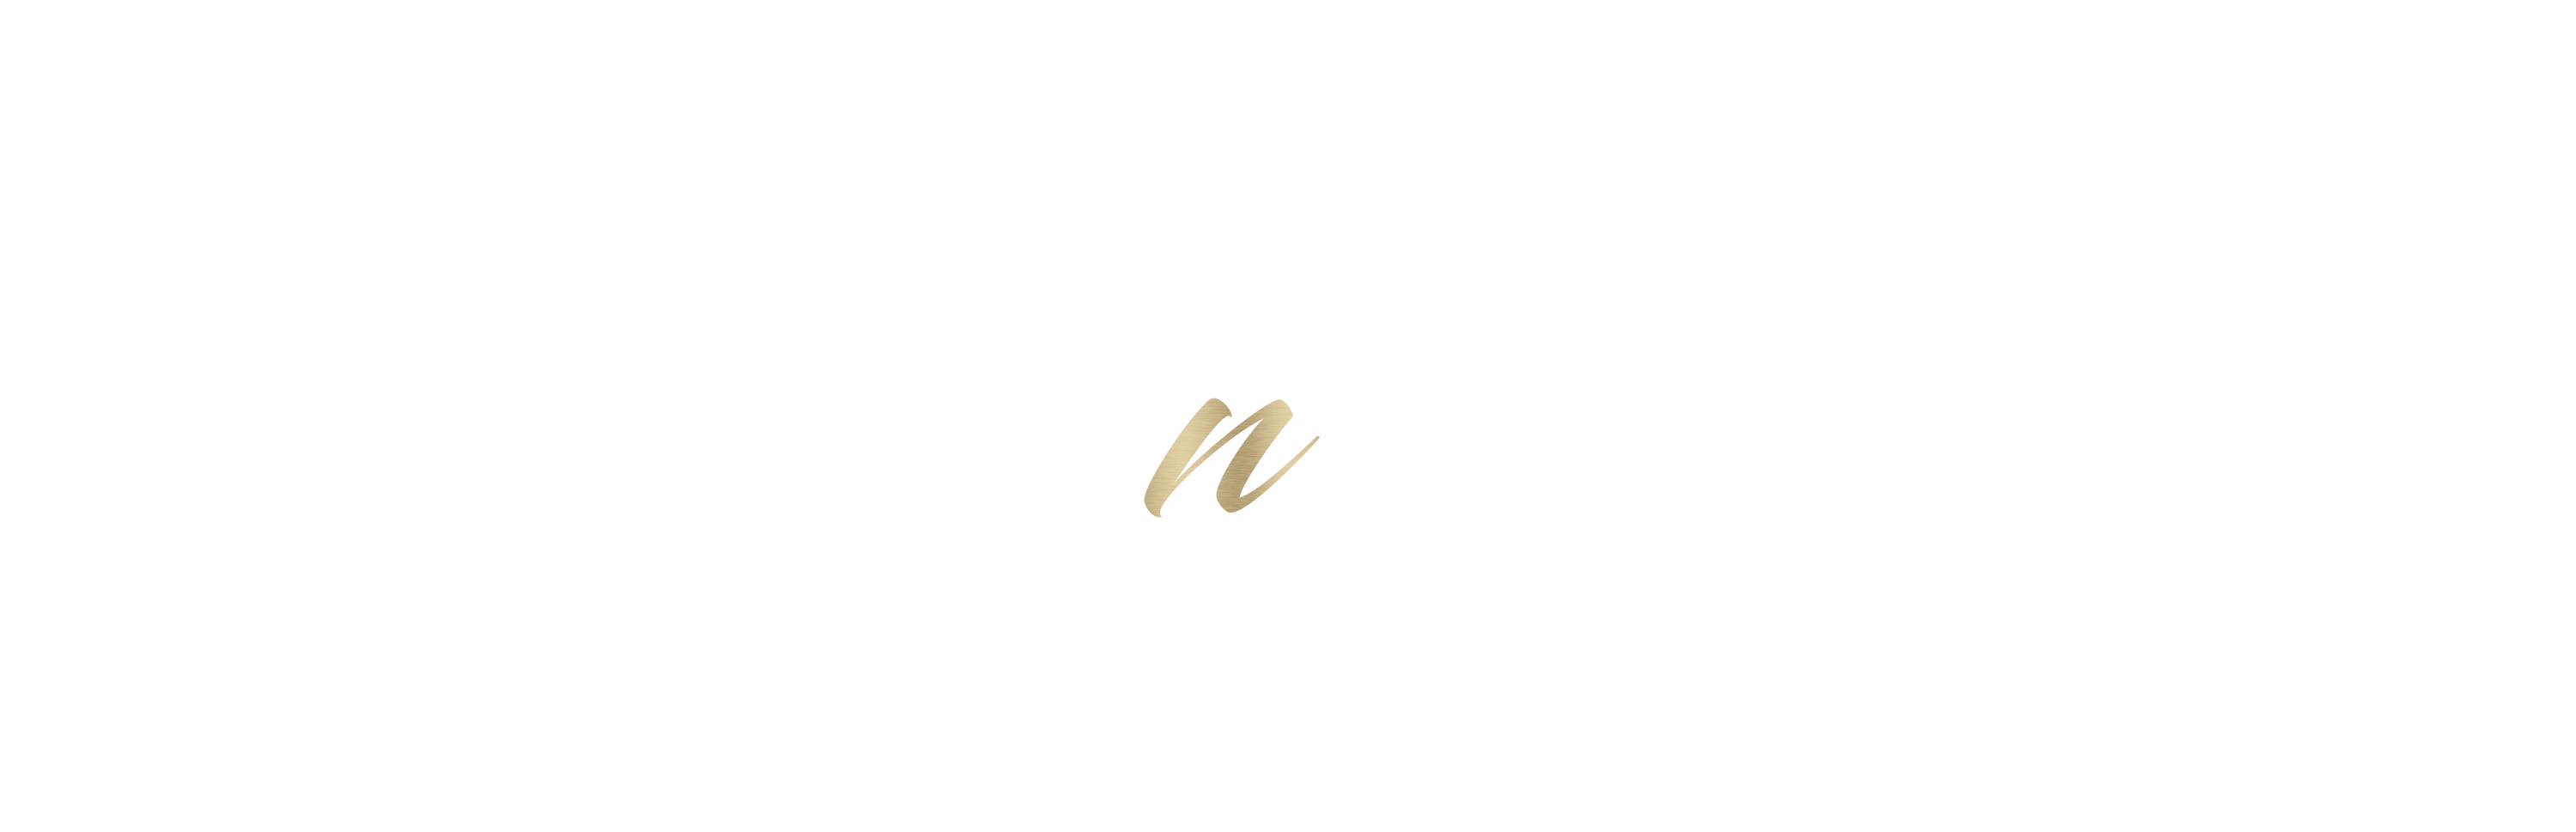 Gold'n Guest St Barth - Weddings & Events